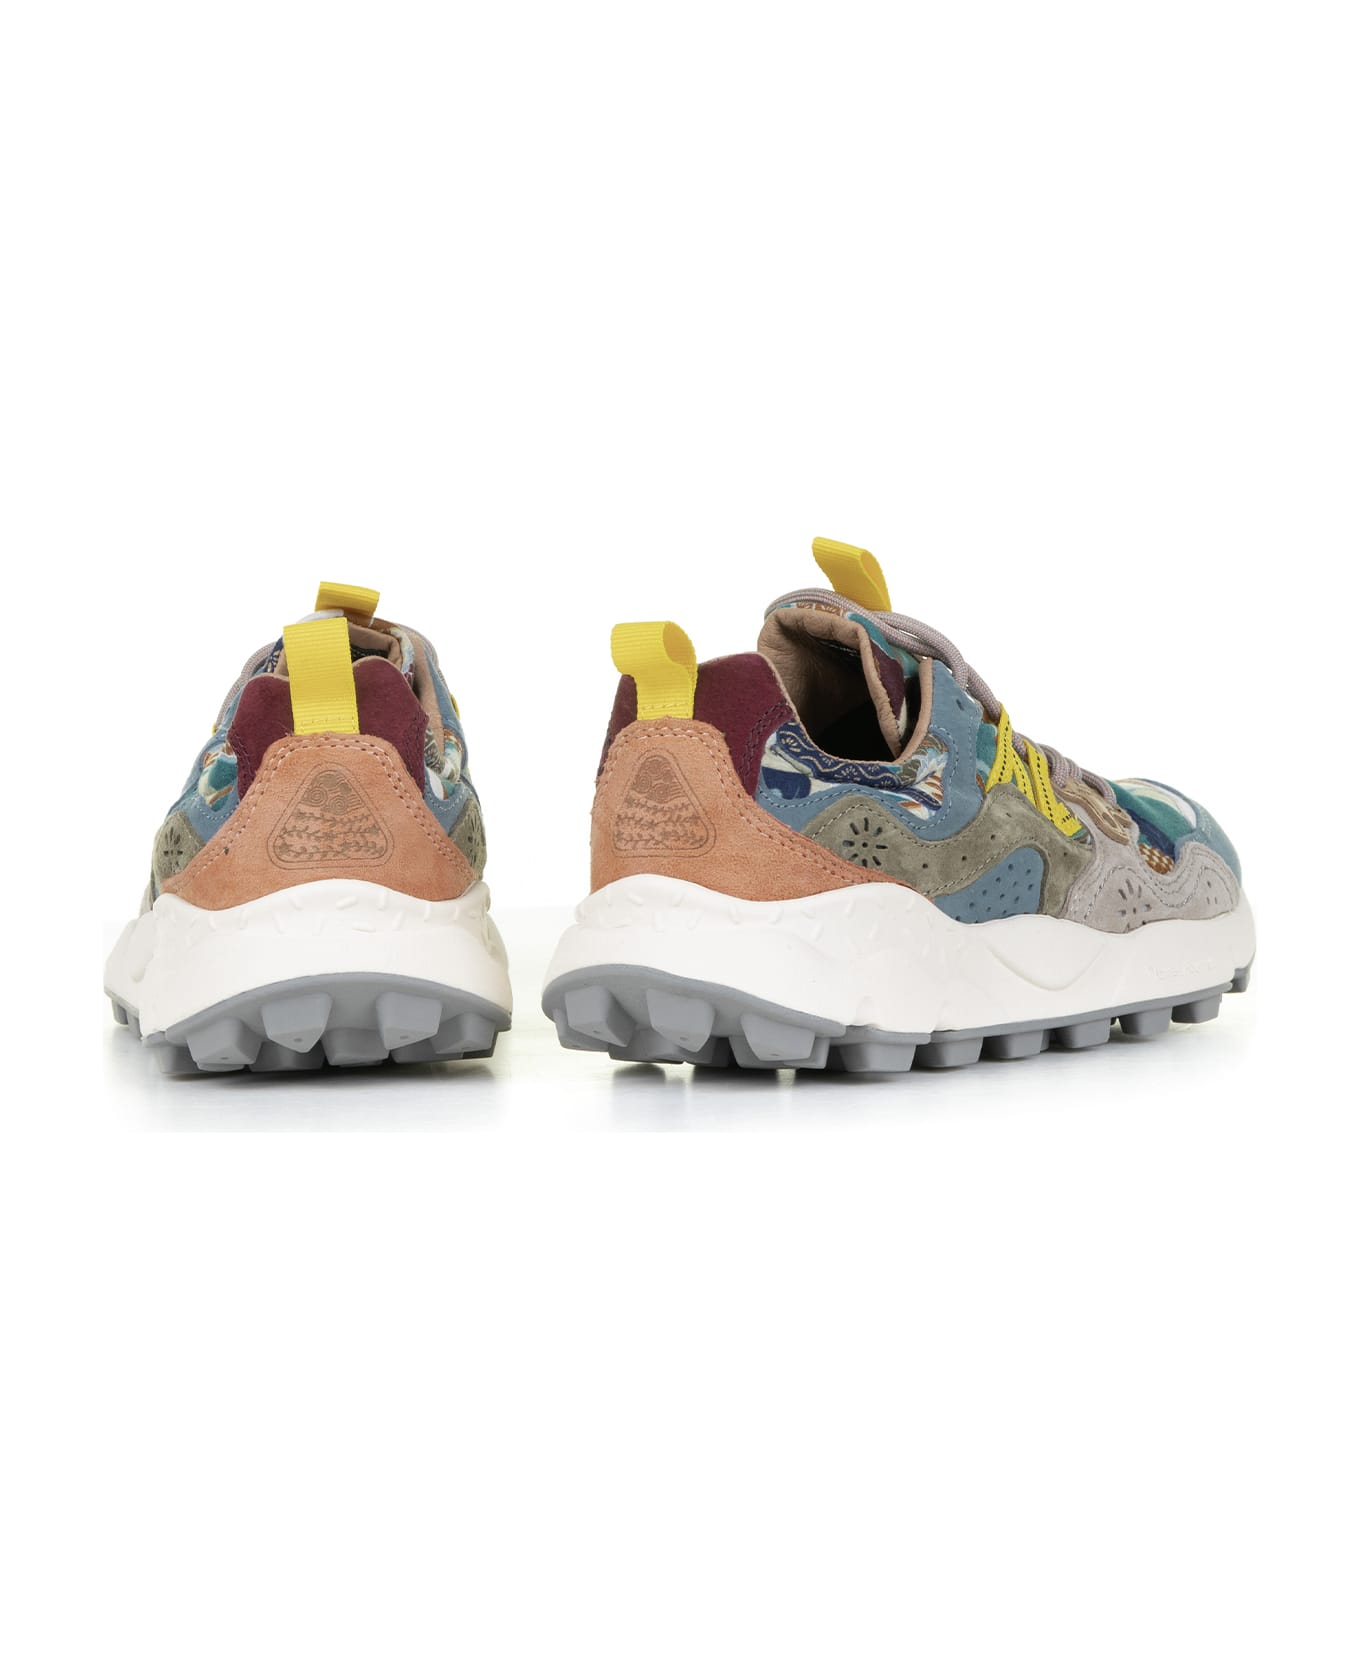 Flower Mountain Blue Yamano Sneakers In Suede And Nylon - TAUPE AZURE